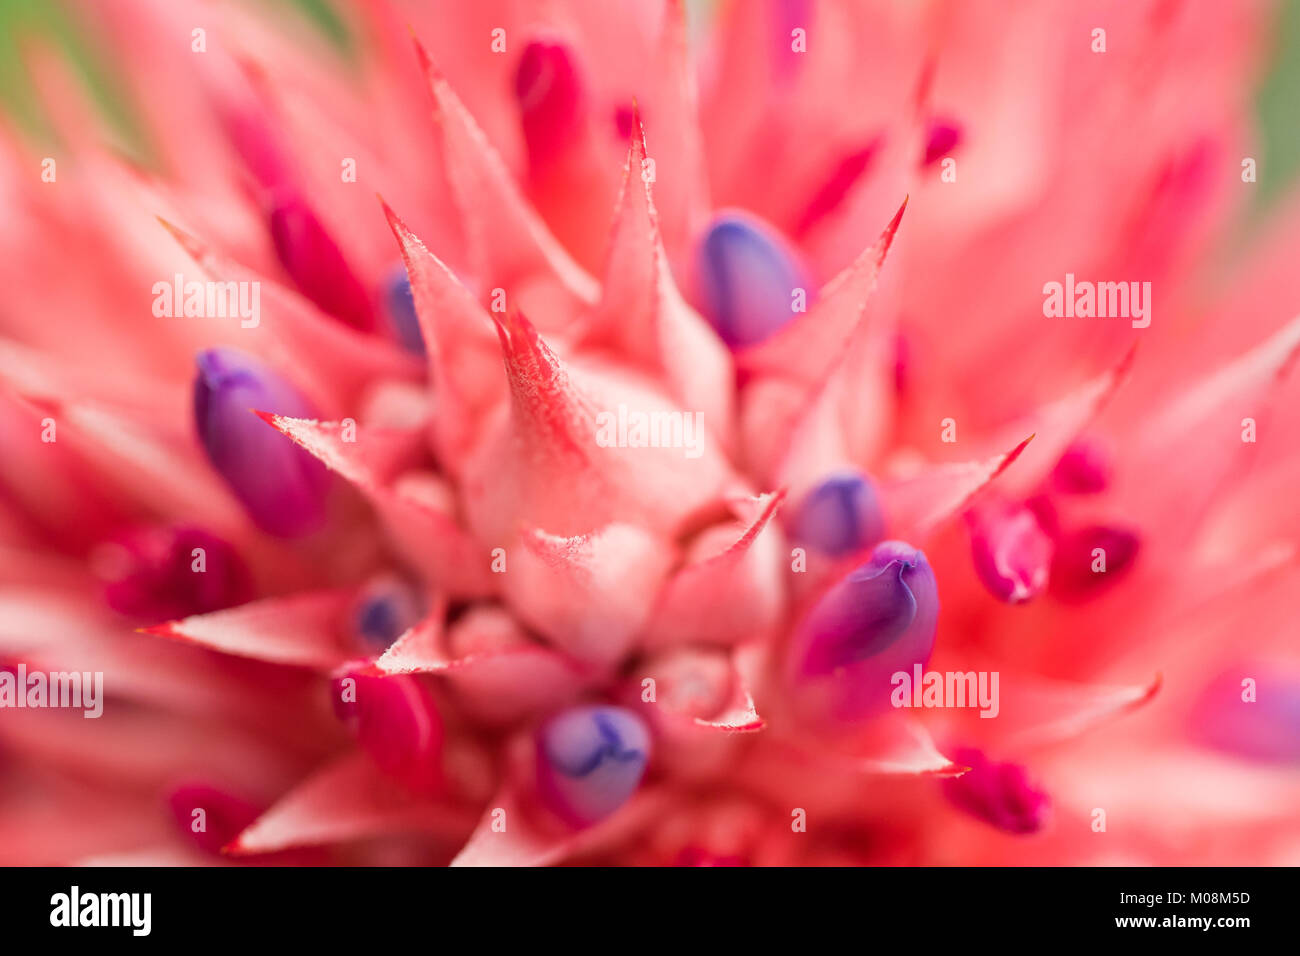 Aechmea fasciata (Silver vase or Urn plant) is a species of flowering plant in the bromeliad family, native to Brazil. Close up. Selective focus. Shal Stock Photo